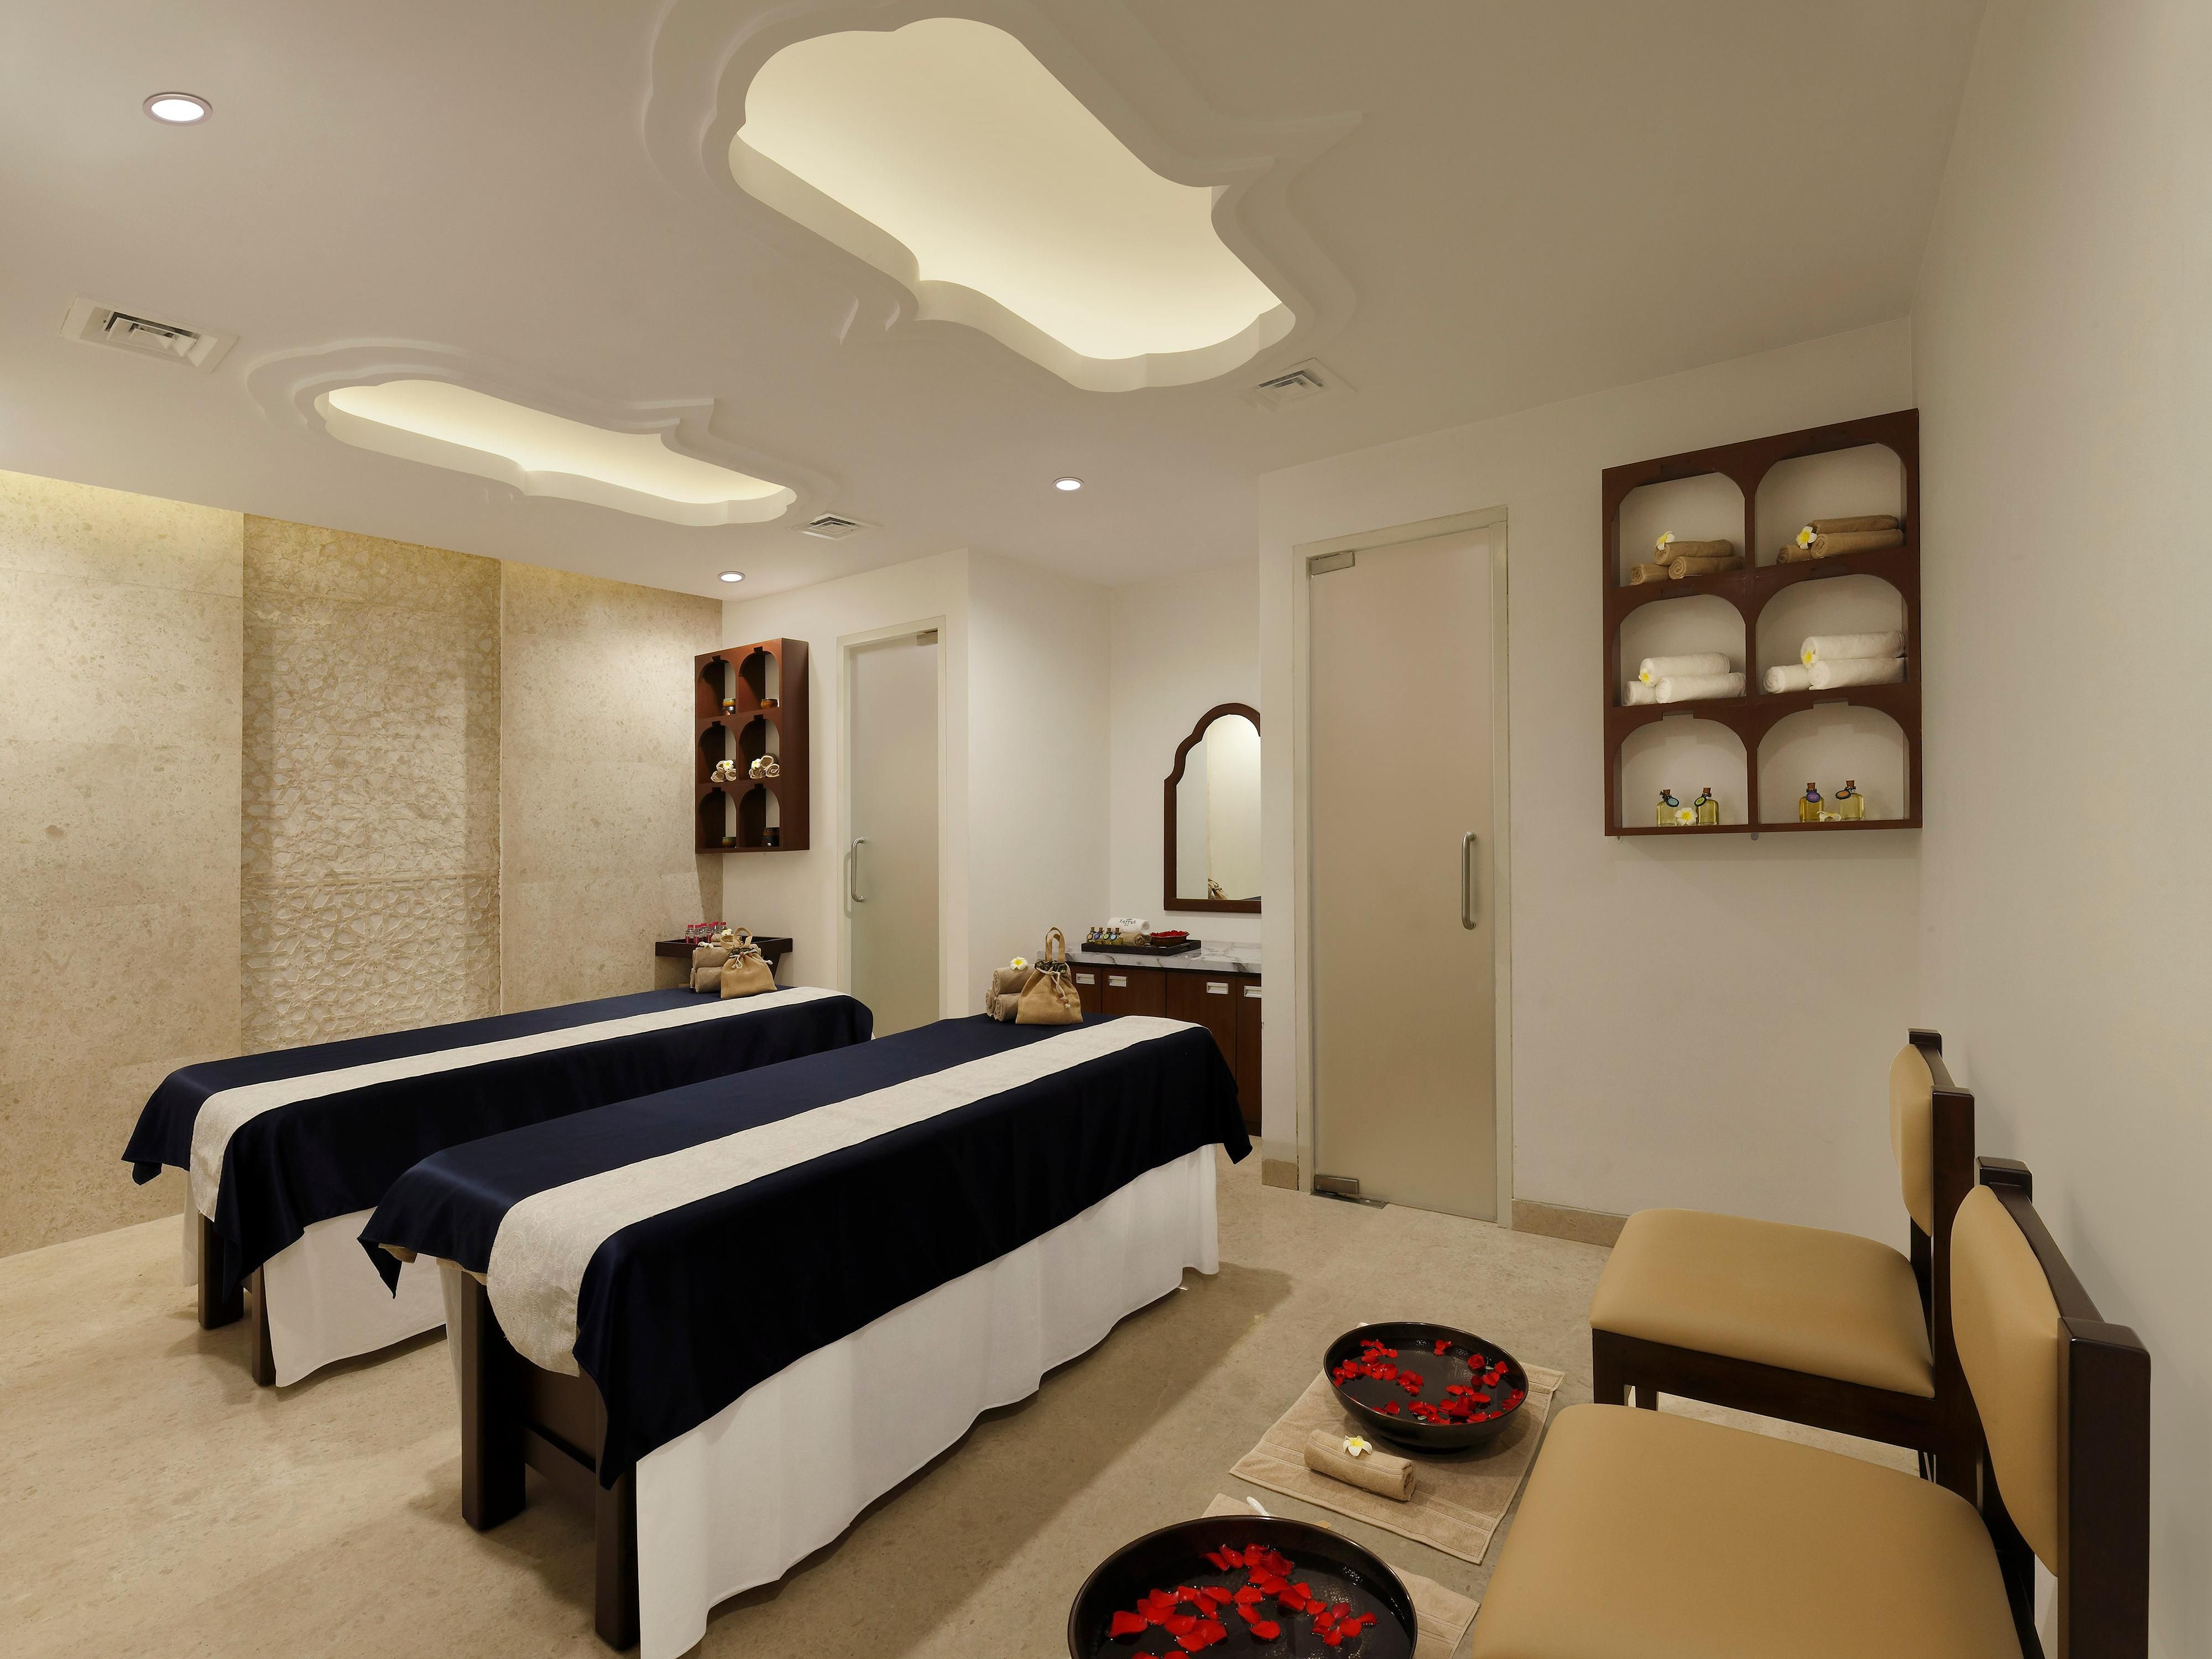 Indulge in the world of relaxation and balanced wellness. Tattva Spa is an oasis of bespoke beauty & wellness therapies offered in the cozy environs of the plush, new, four spa therapy suites with attached steam and shower facilities.